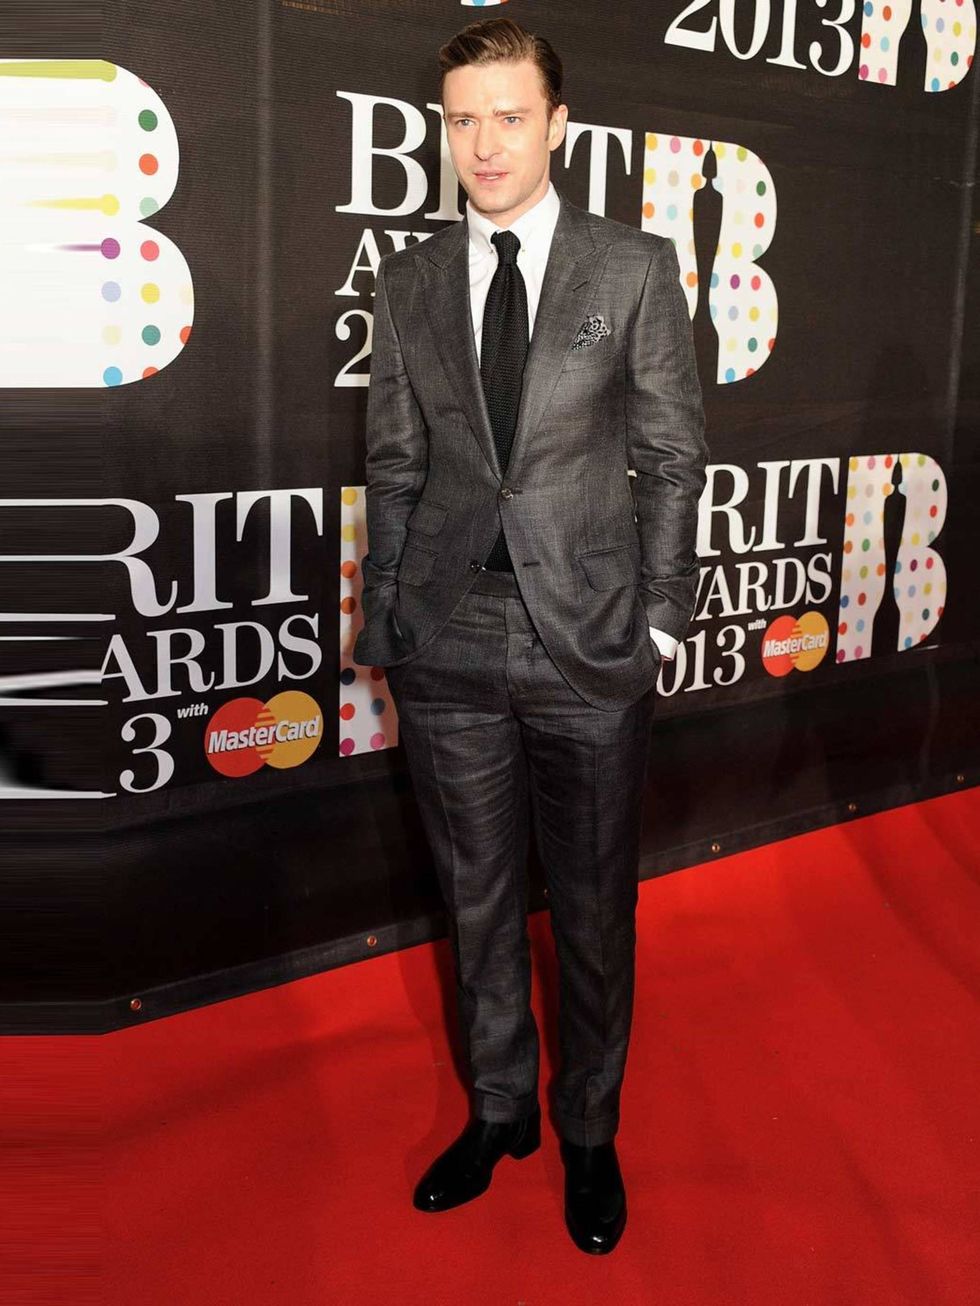 <p><a href="http://www.elleuk.com/star-style/celebrity-style-files/justin-timberlake-elle-man-of-the-week">Justin Timberlake</a> attends the Brit Awards 2013.</p>